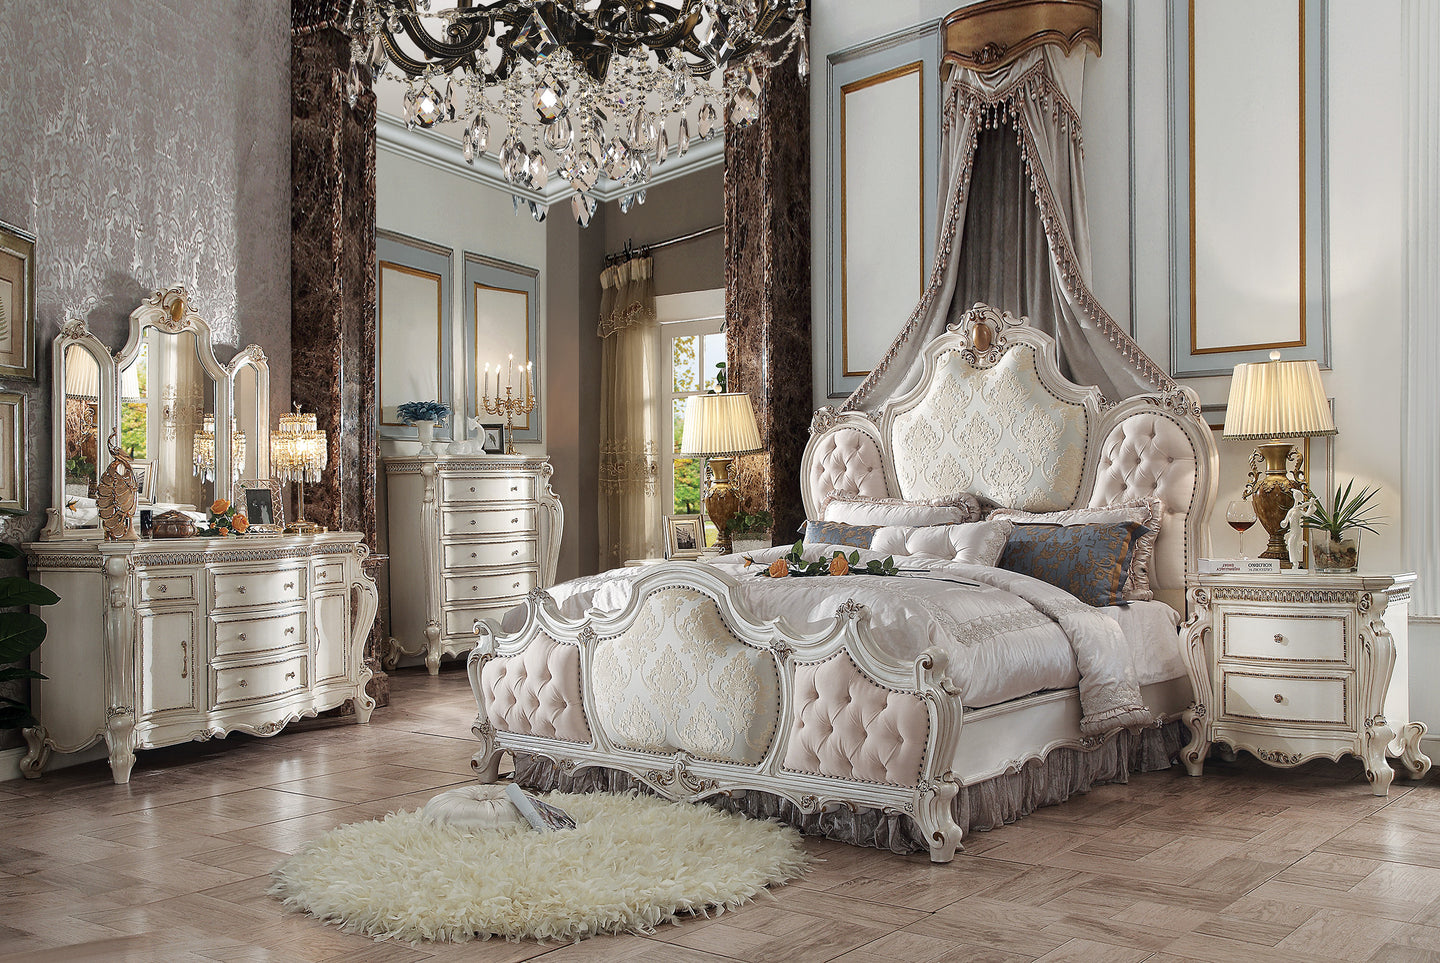 Picardy Fabric & Antique Pearl Queen Bed